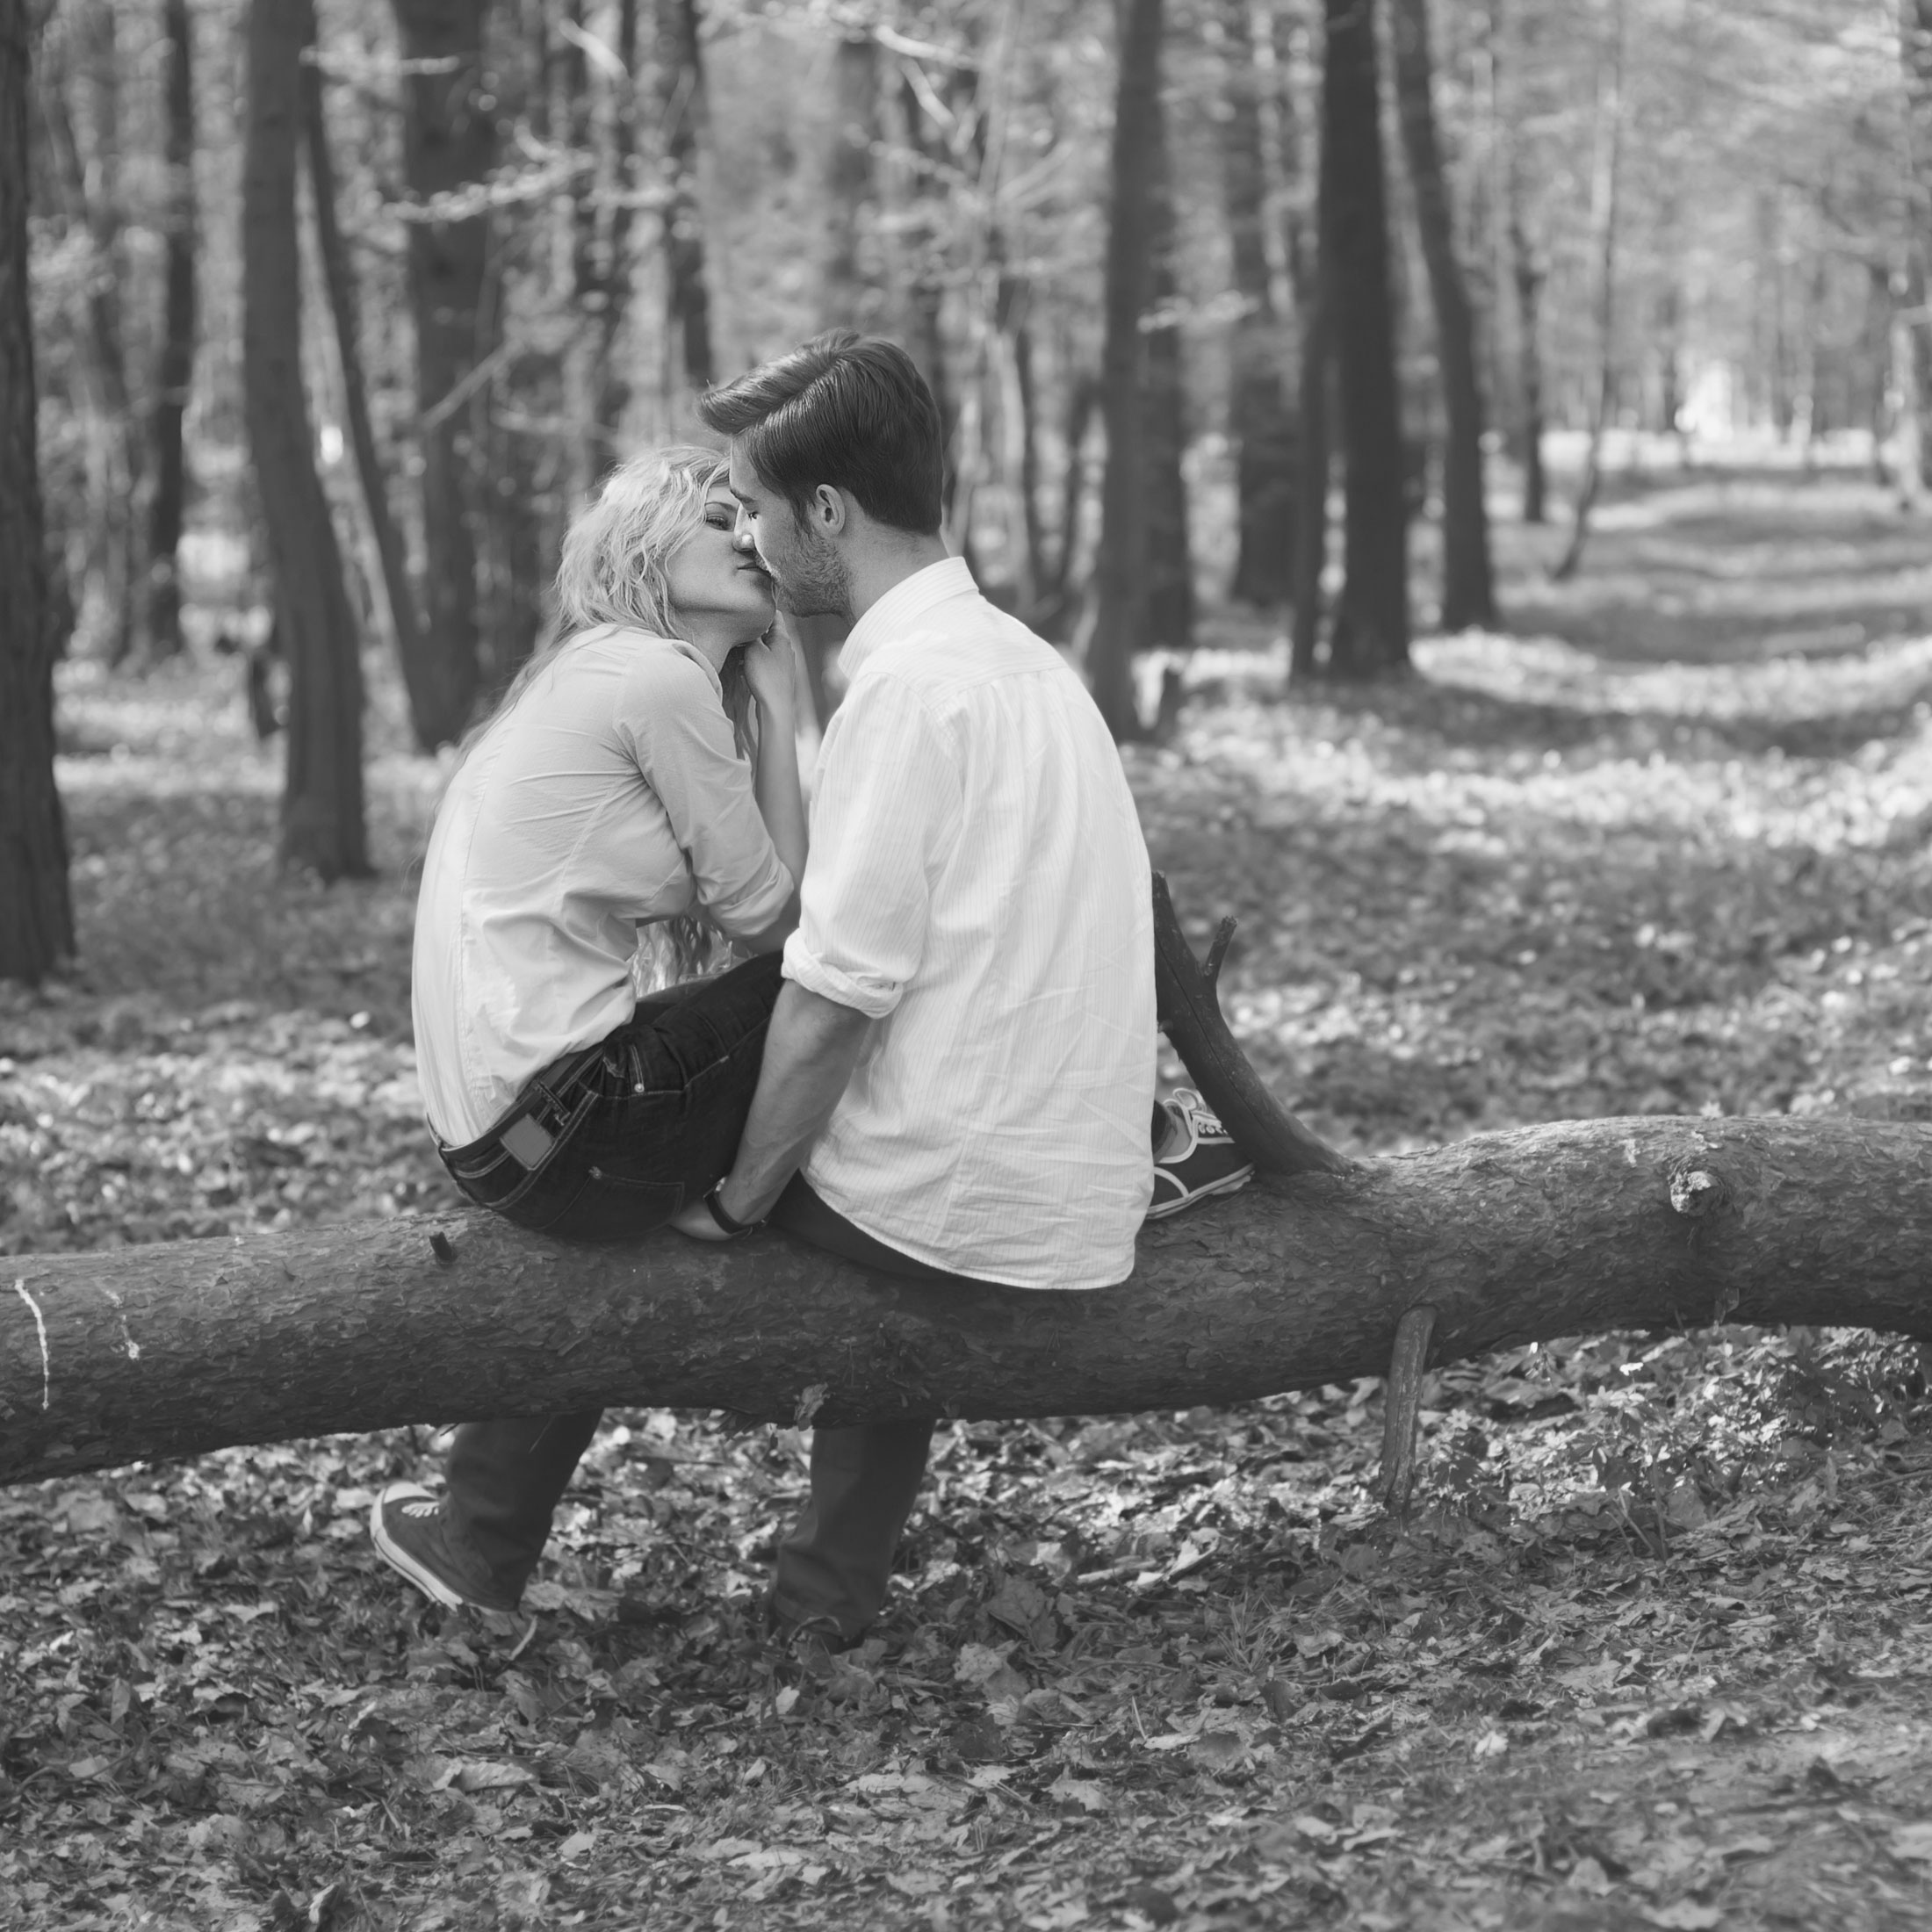 Black and white photo of a couple kissing on a fallen tree in the middle of a forest